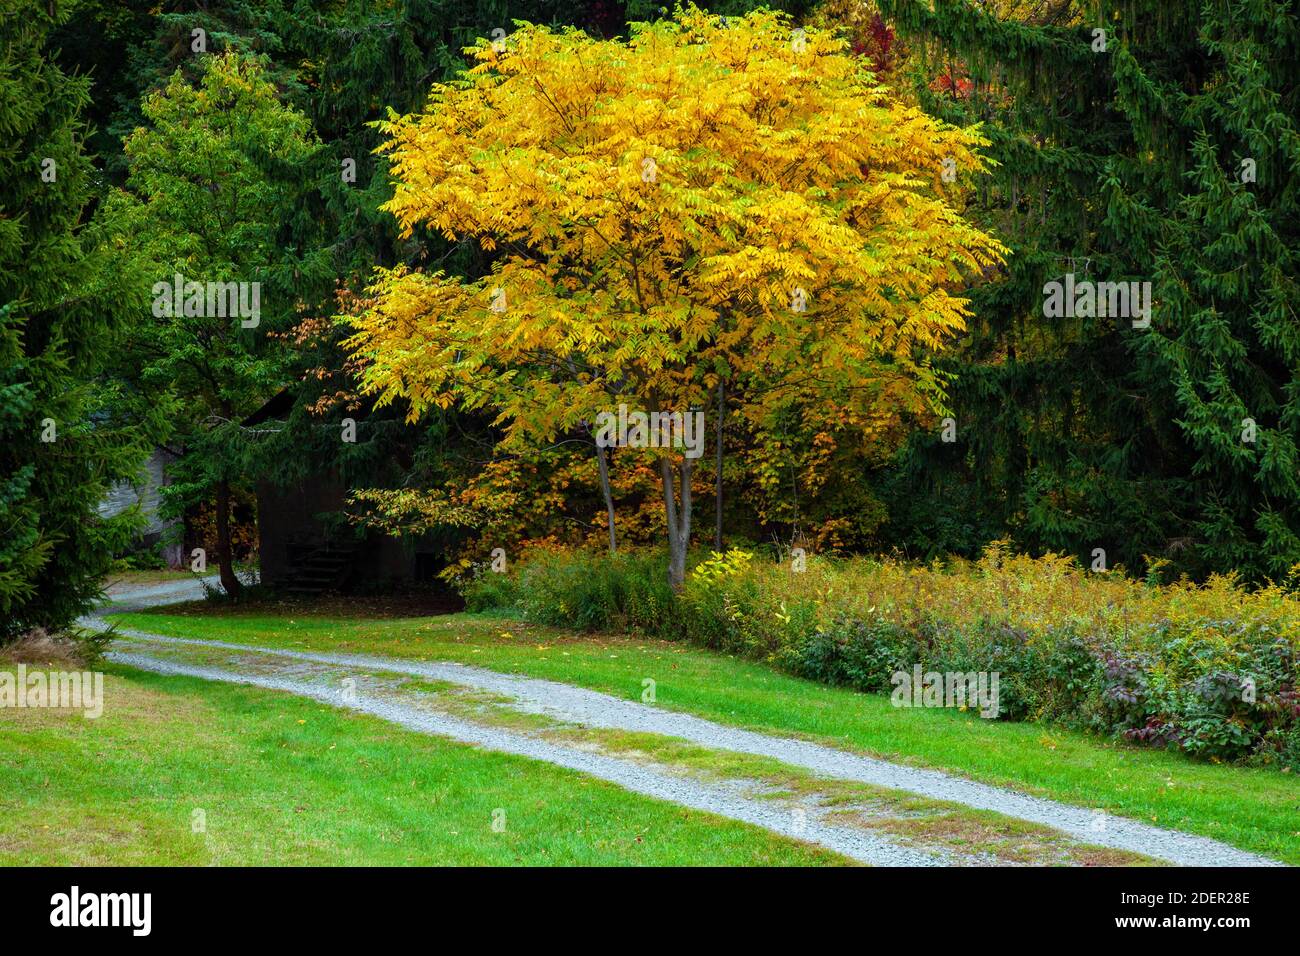 A country lane and butternut tree in autumn in Pennsylvania’s Pocono Mountains. Stock Photo